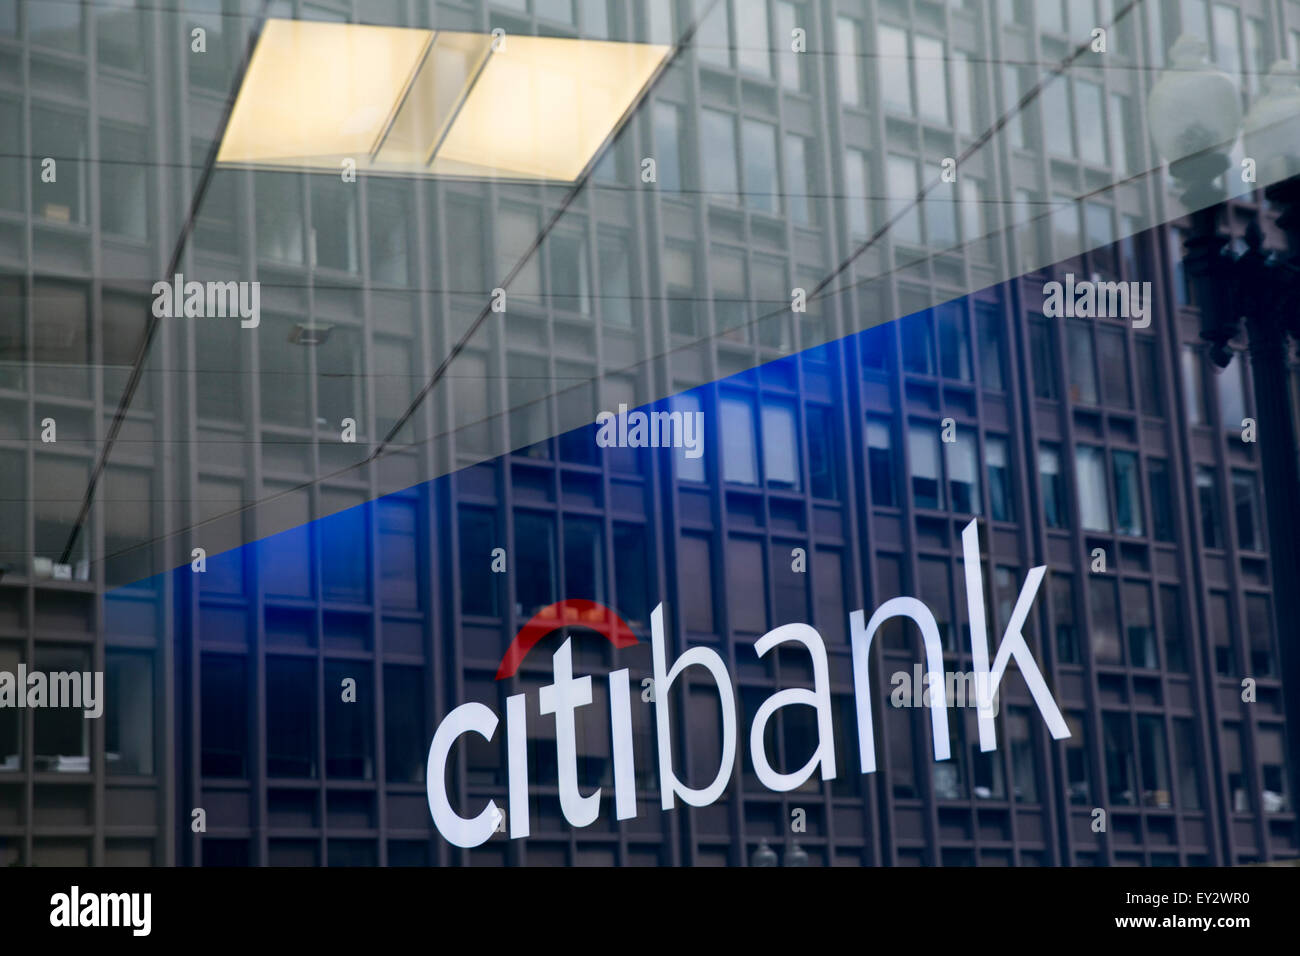 A Citibank logo sign in downtown Washington, D.C., on July 11, 2015. Citibank is the consumer division of Citigroup. Stock Photo